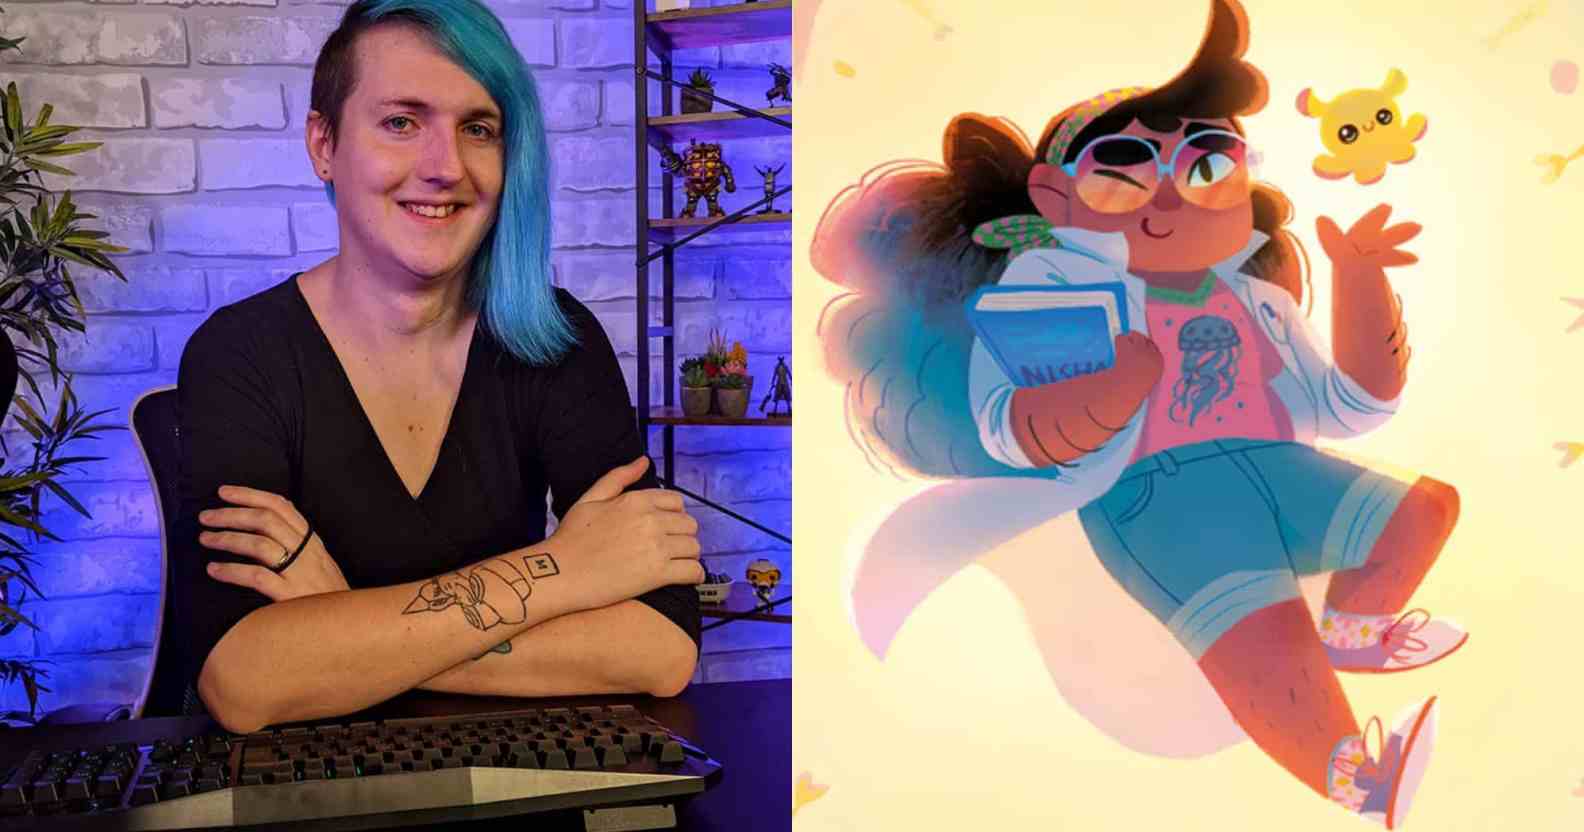 In the photograph on the left, Laura Kate Dale sits at a computer desk. She has an undercut hairstyle with bright blue long hair on one side. In the illustration on the right, a young trans woman smiles triumphantly as she poses next to a small yellow monster